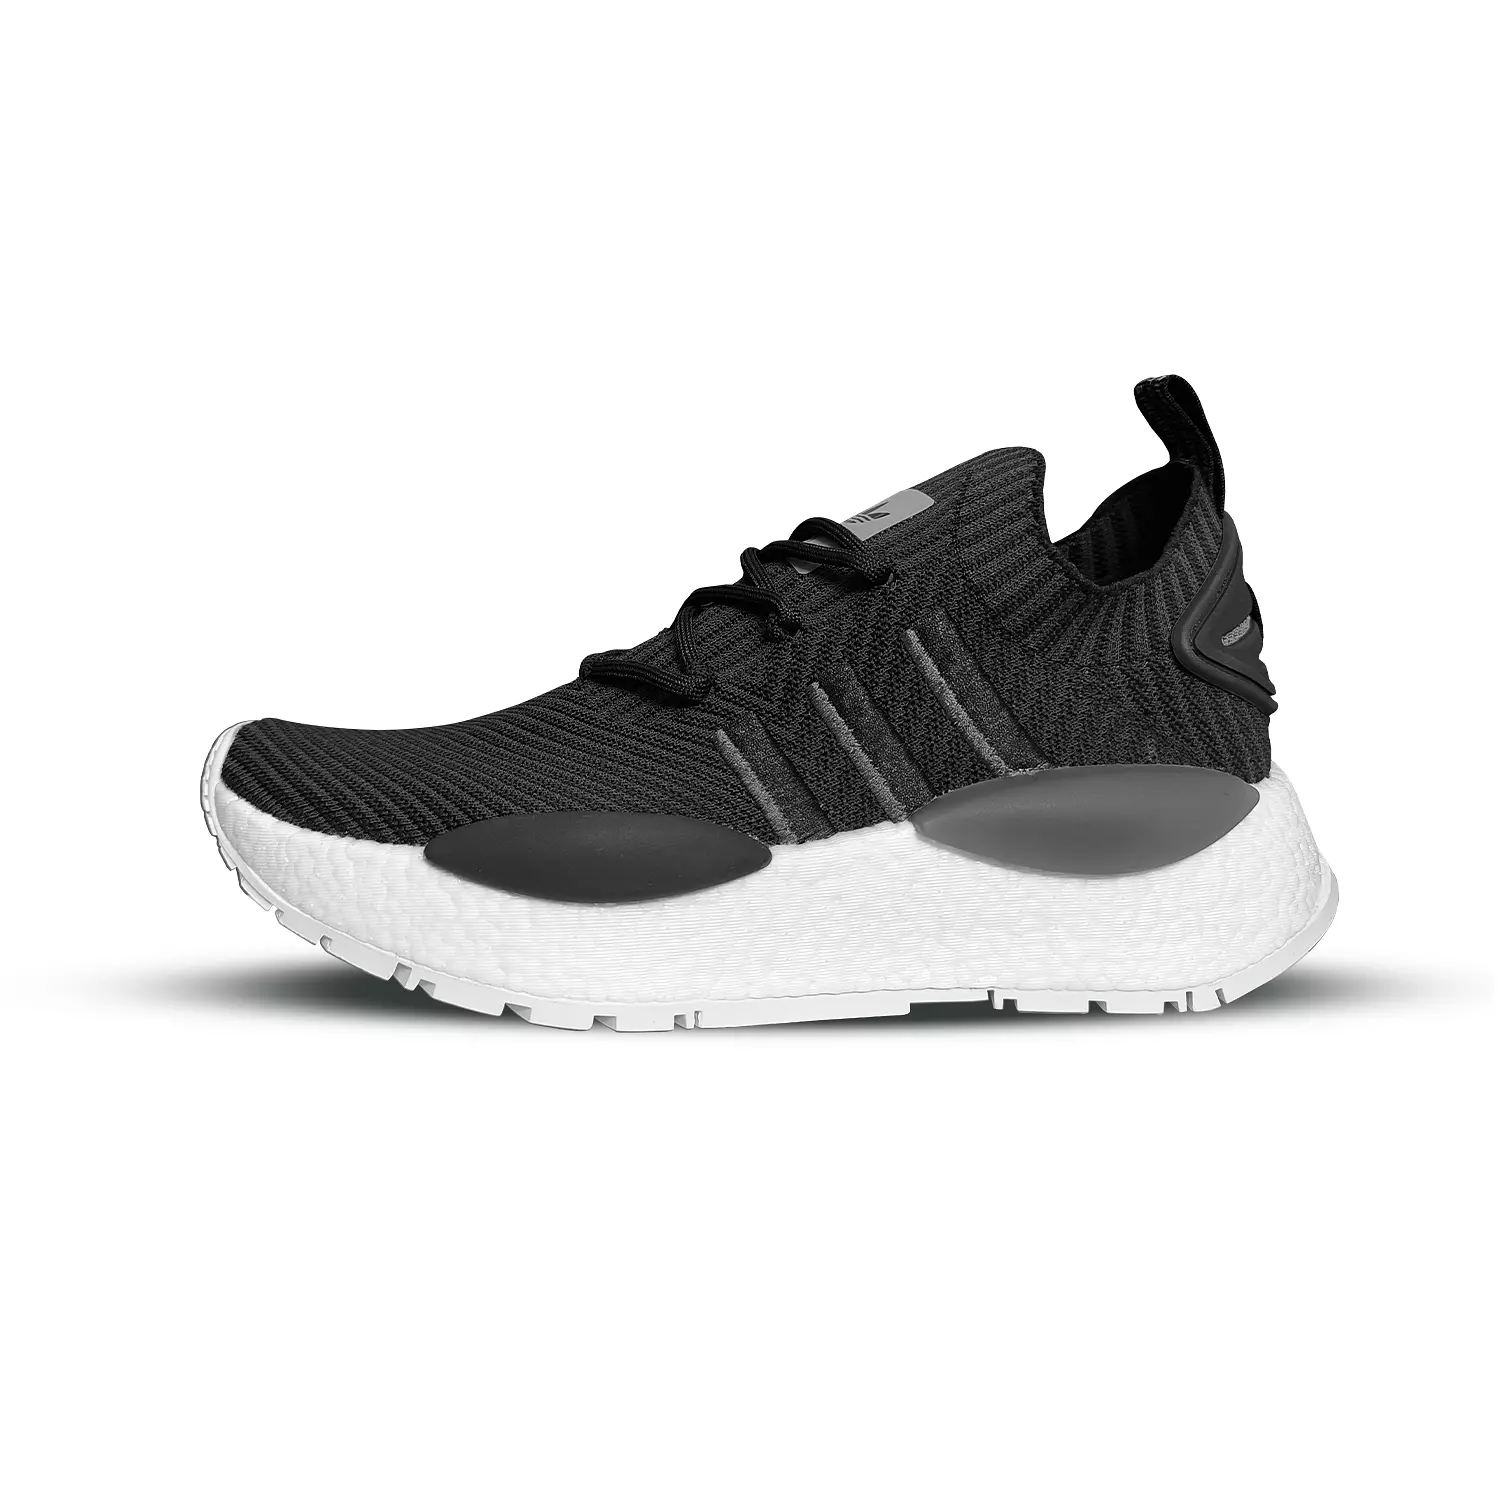 ADIDAS 3 LINE - RUNNING SHOES hover image